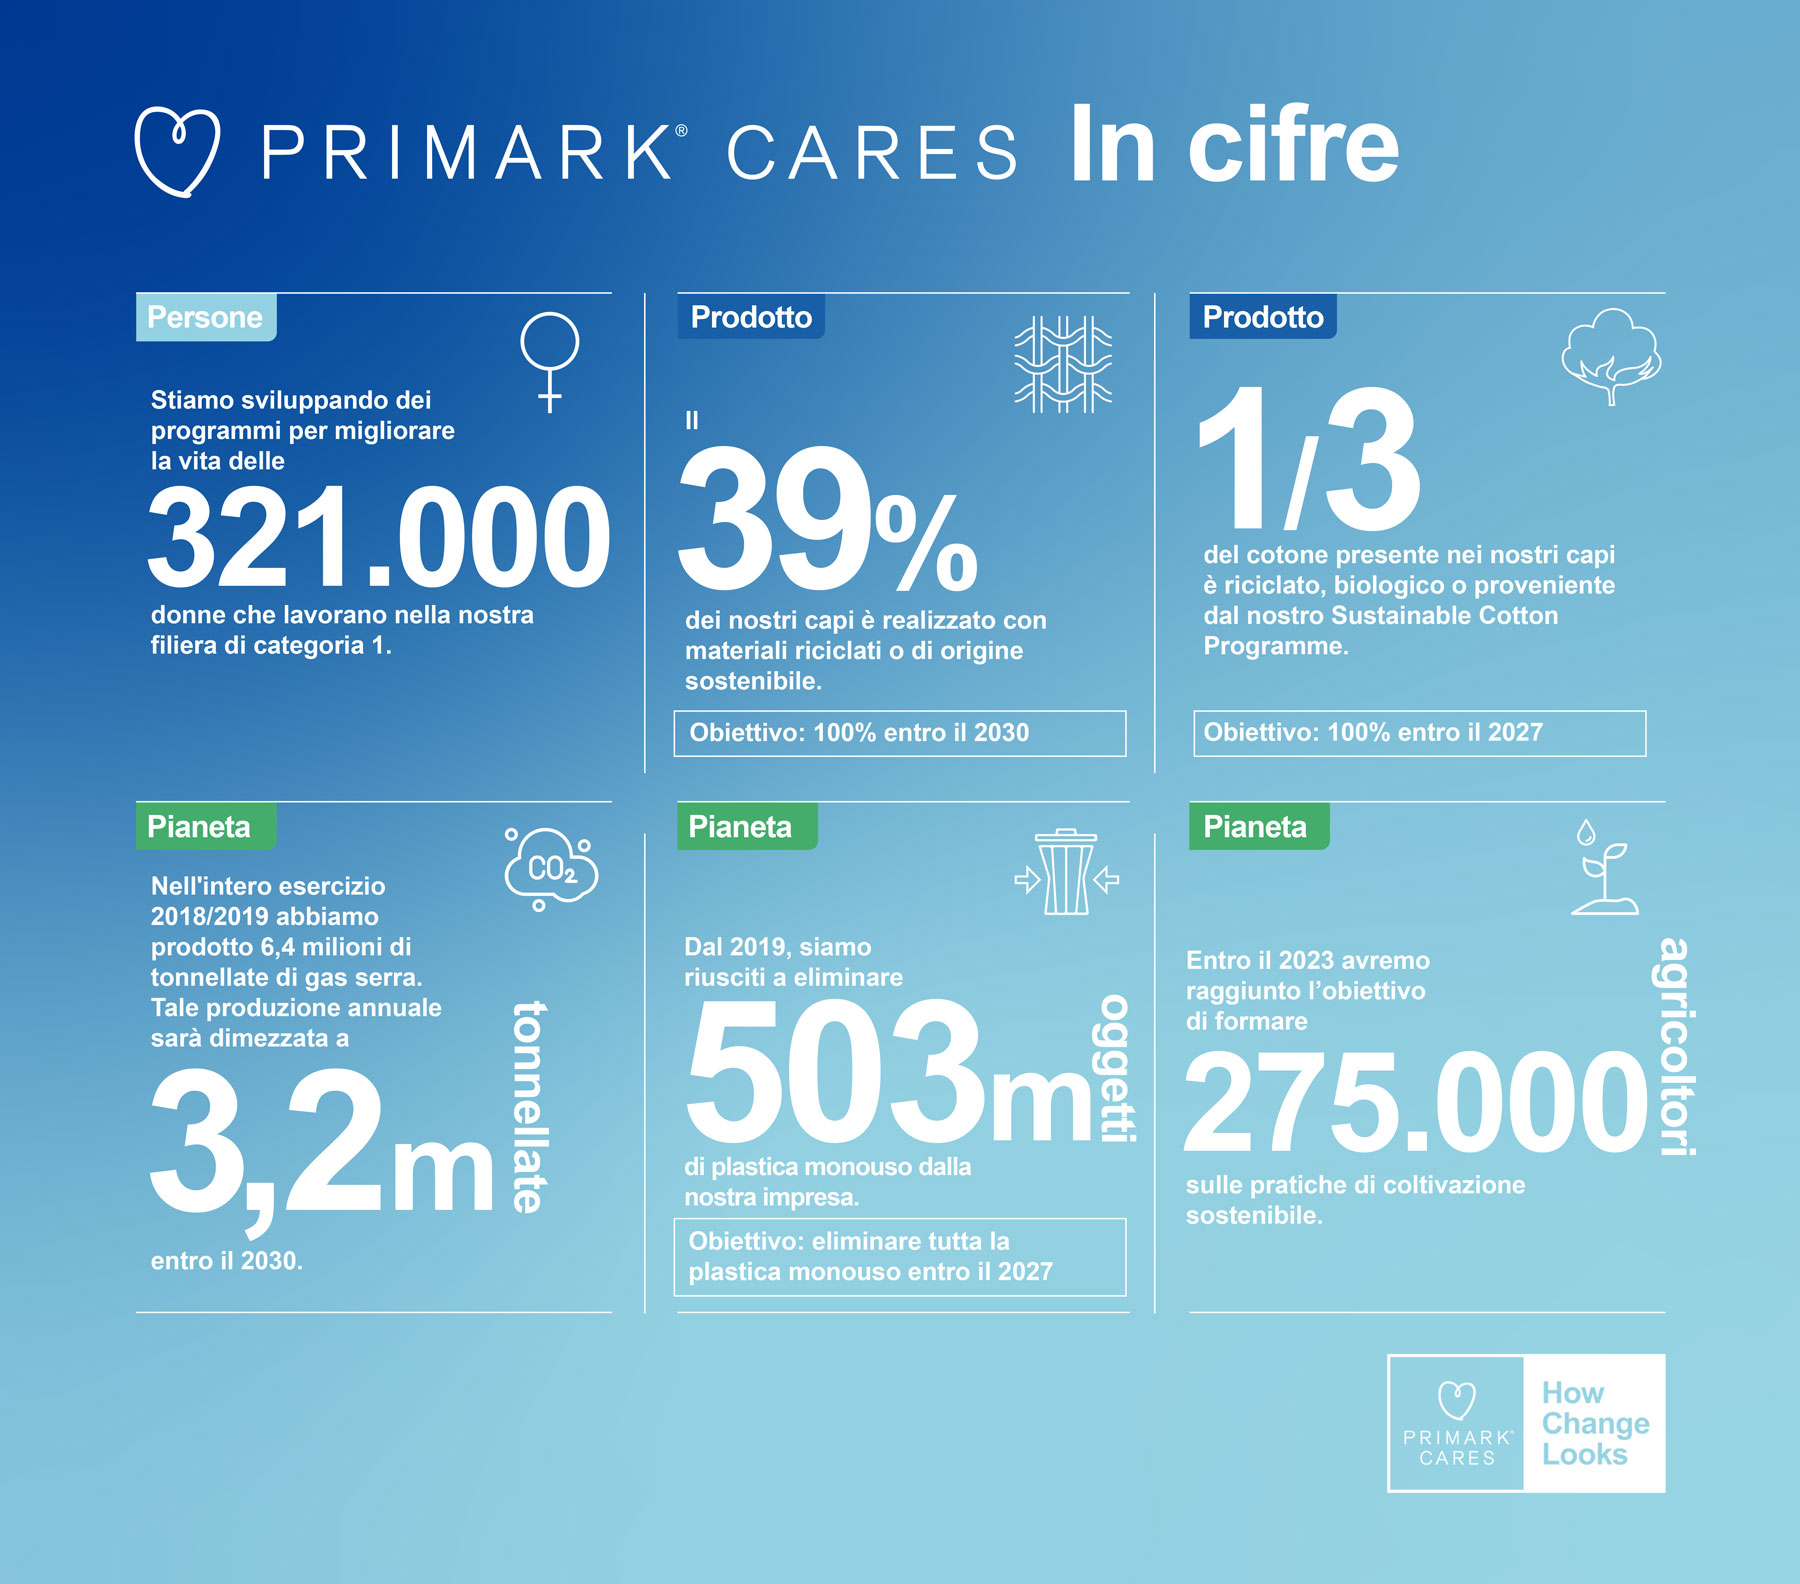 The Image displays an Infographic showing how Primark Cares In Numbers